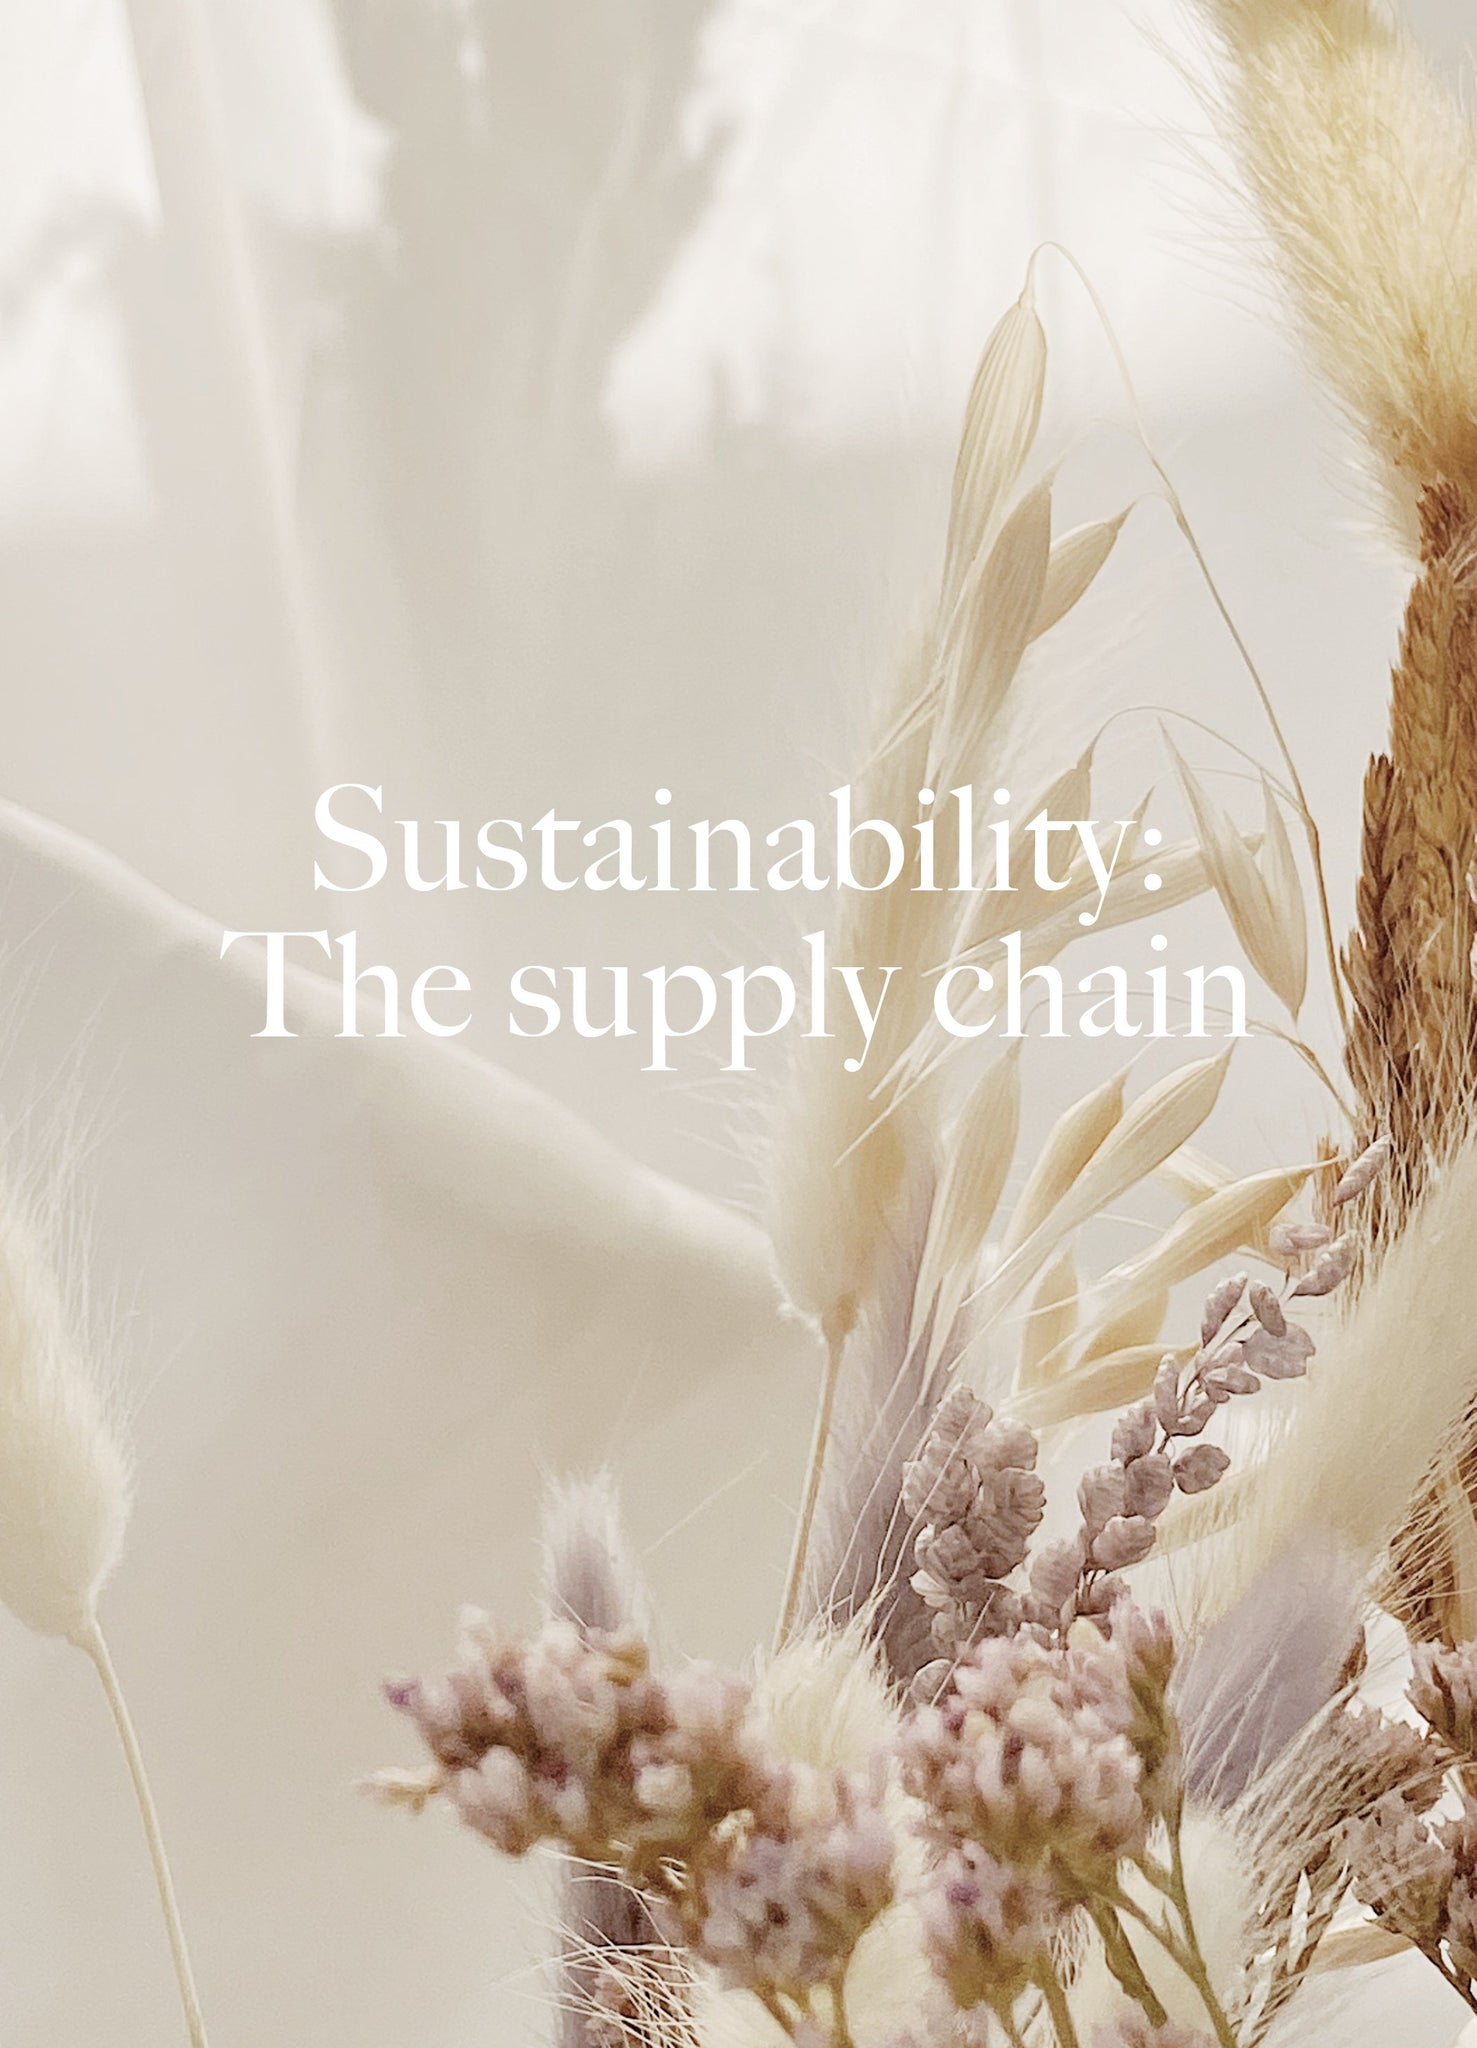 Stories-Sustainability: The Supply Chain - Dora Larsen | Colourful Lingerie